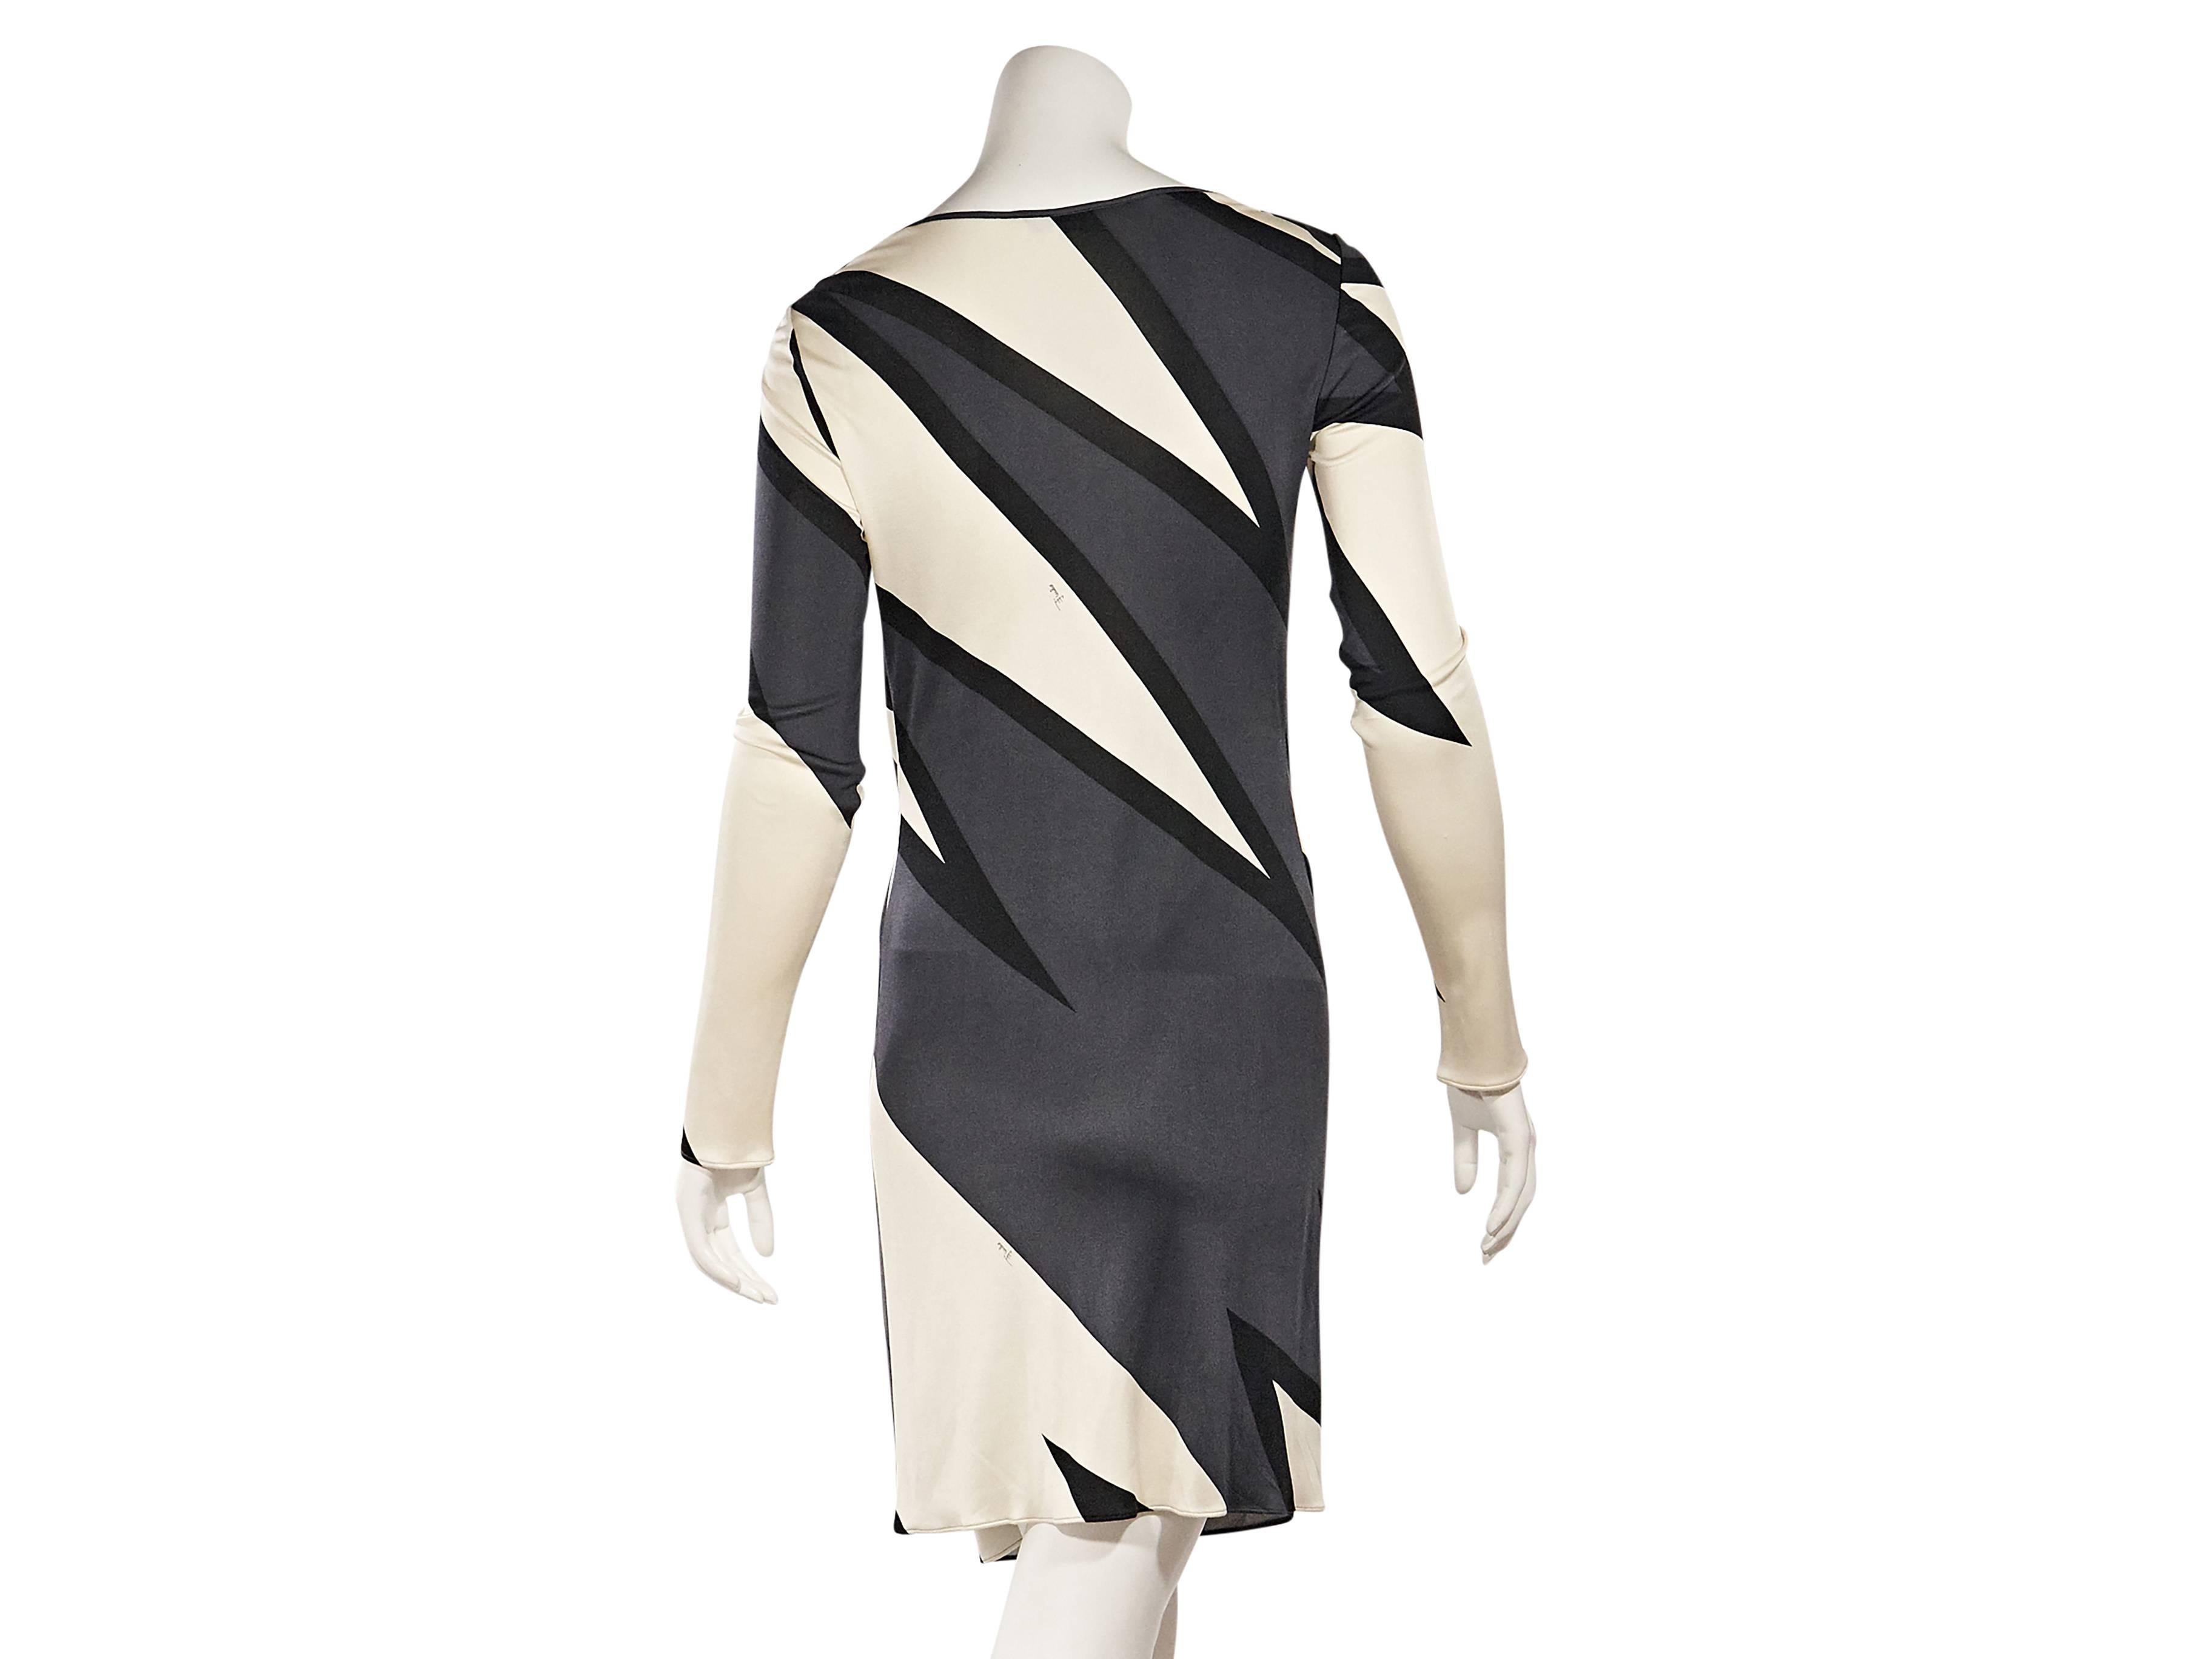 Product details:  Grey and ivory printed faux wrap dress by Emilio Pucci.  V-neck.  Long sleeves.  Gathered at hips.  Pullover style.   
Condition: Excellent. 
Est. Retail $ 430.00